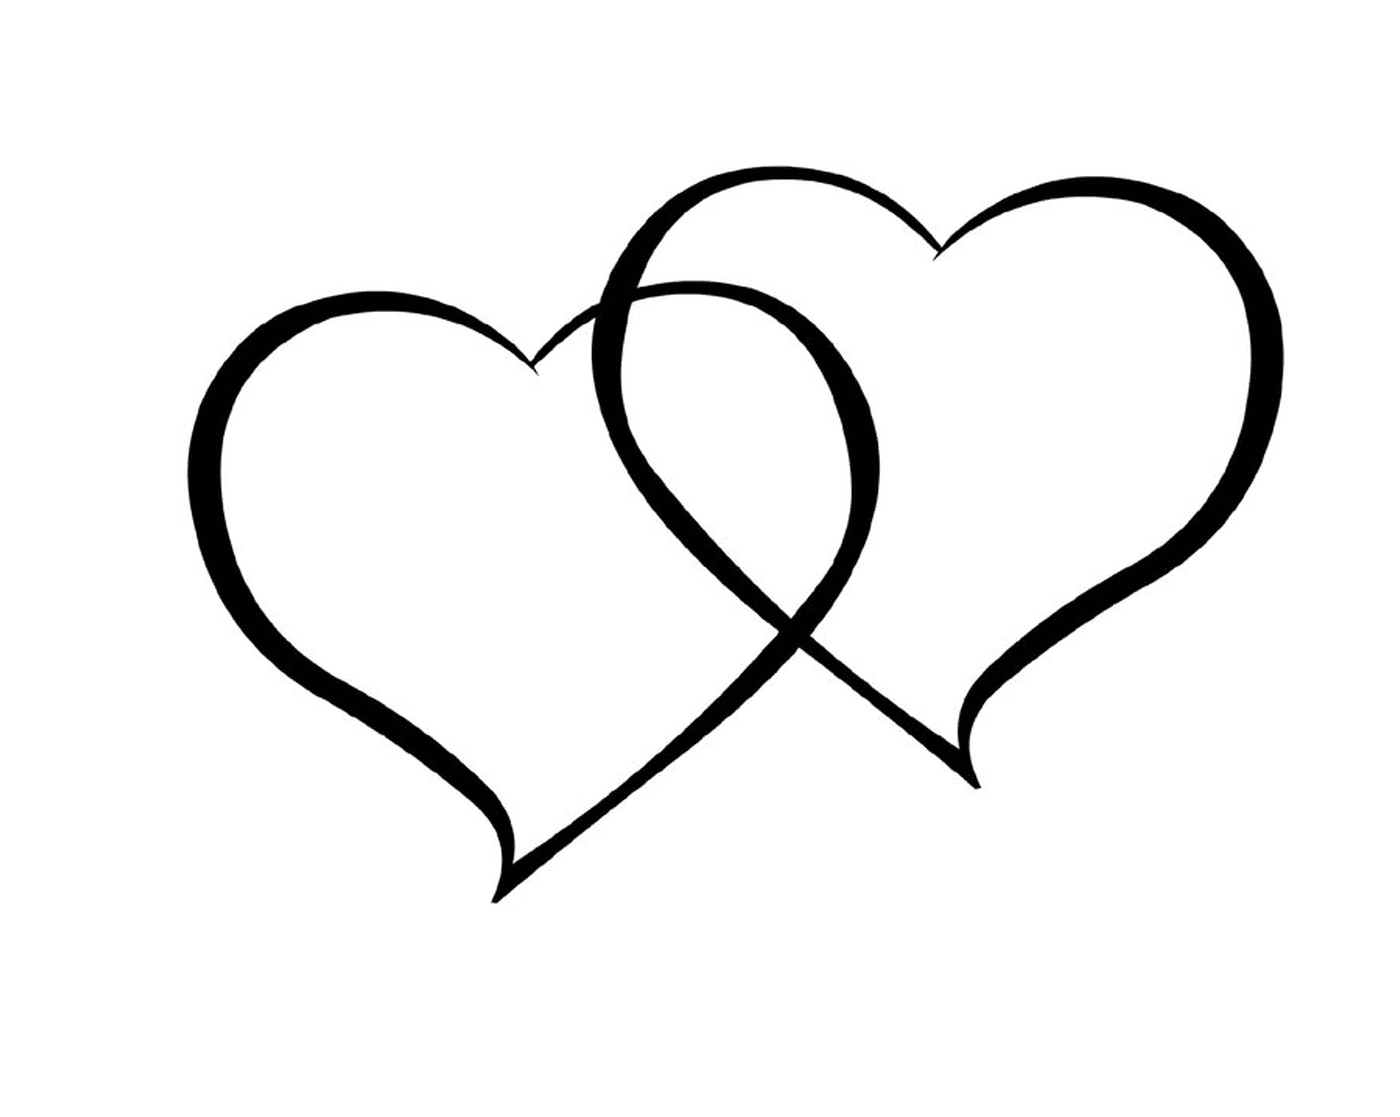  Two hearts drawn in black ink on a white background 